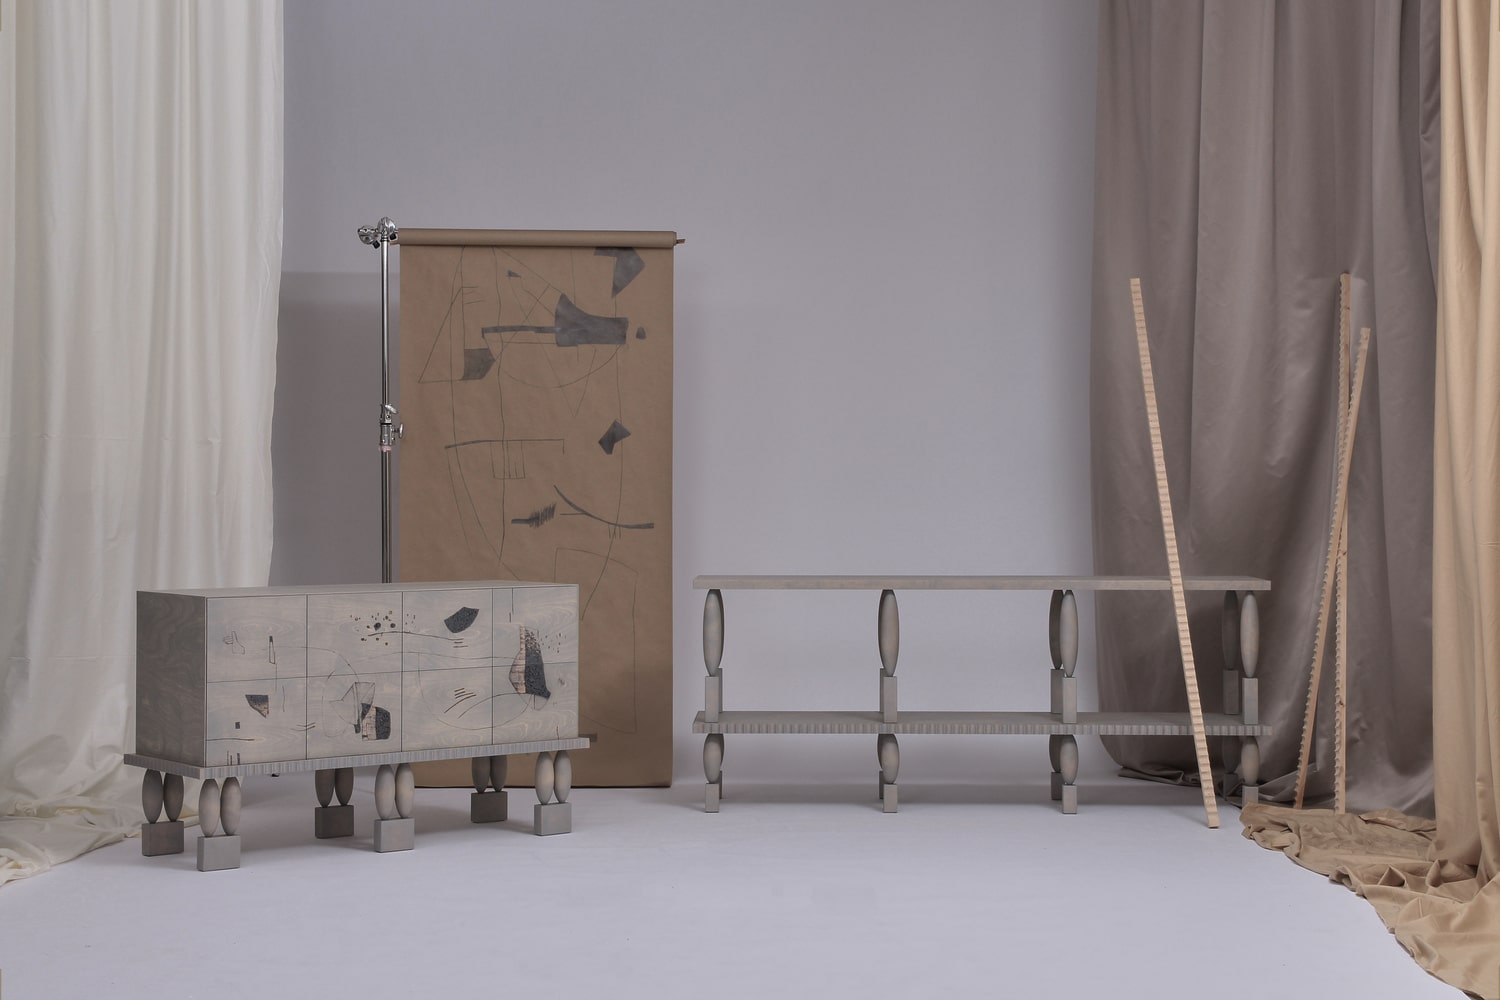 Nouveau collection_sculptural collectible furniture_cabinets and shelving units_limited edition_design by Jiri Krejcirik x pyrography drawings by Taja Spasskova_2021_2